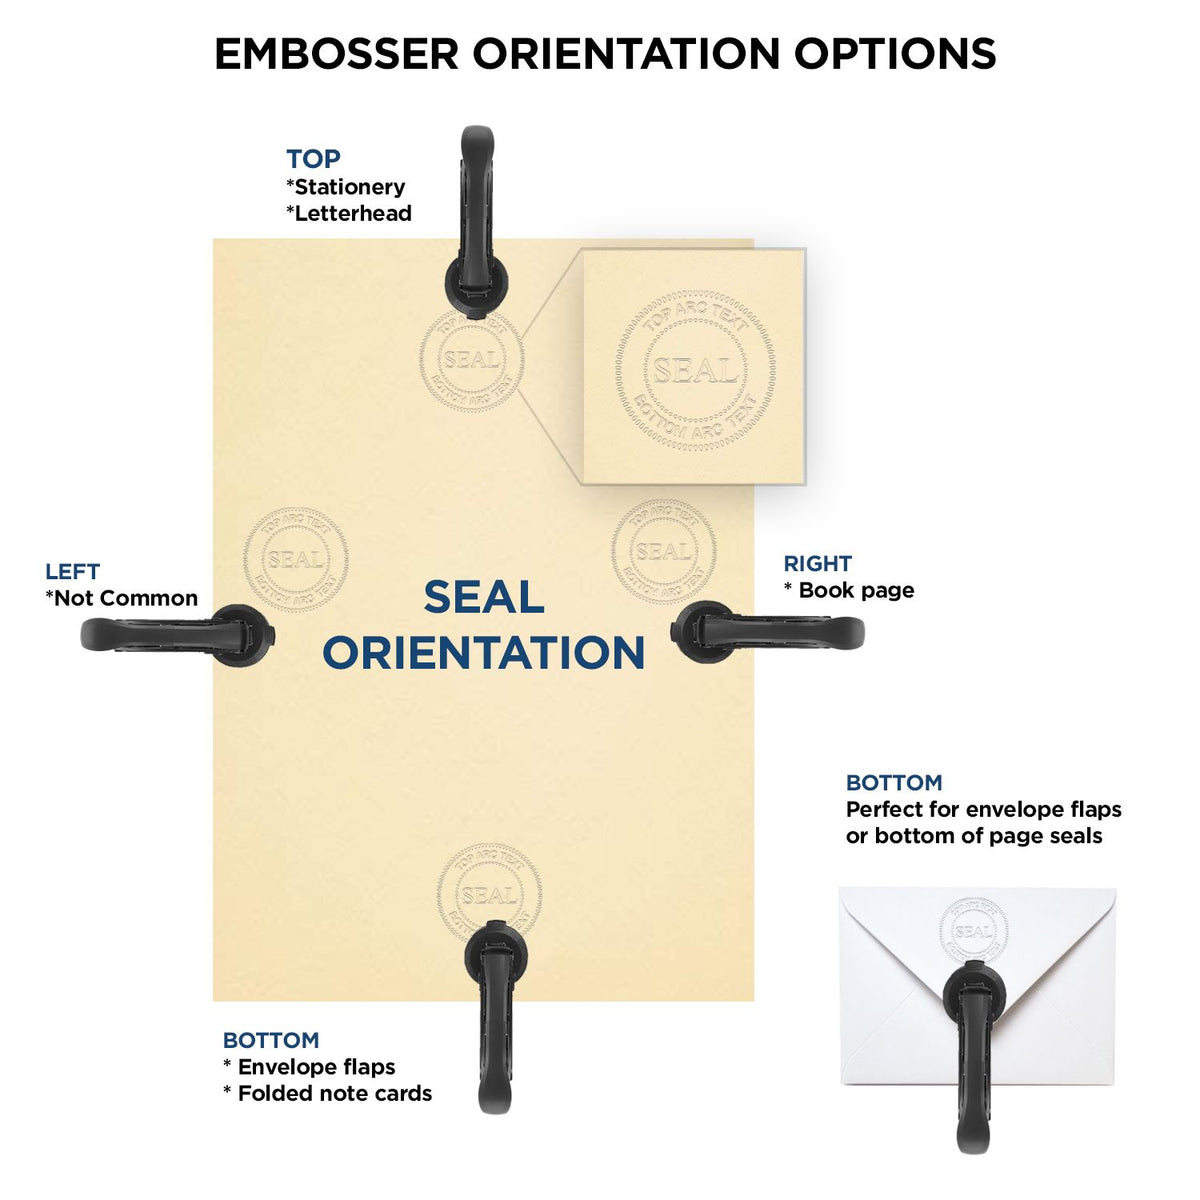 An infographic for the Extended Long Reach Nebraska Surveyor Embosser showing embosser orientation, this is showing examples of a top, bottom, right and left insert.